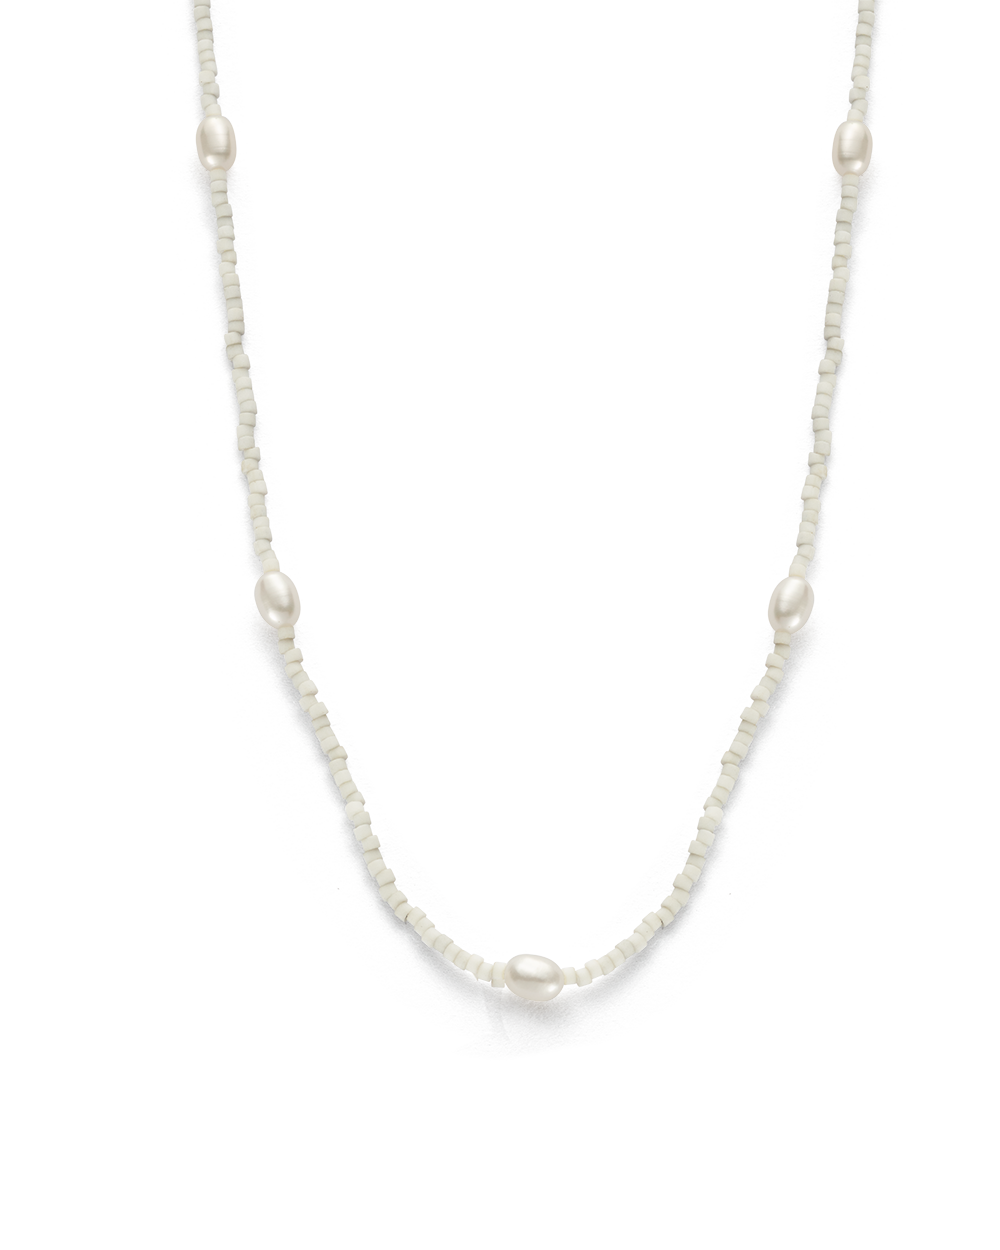 VISTA PEARL NECKLACE (18K GOLD PLATED)